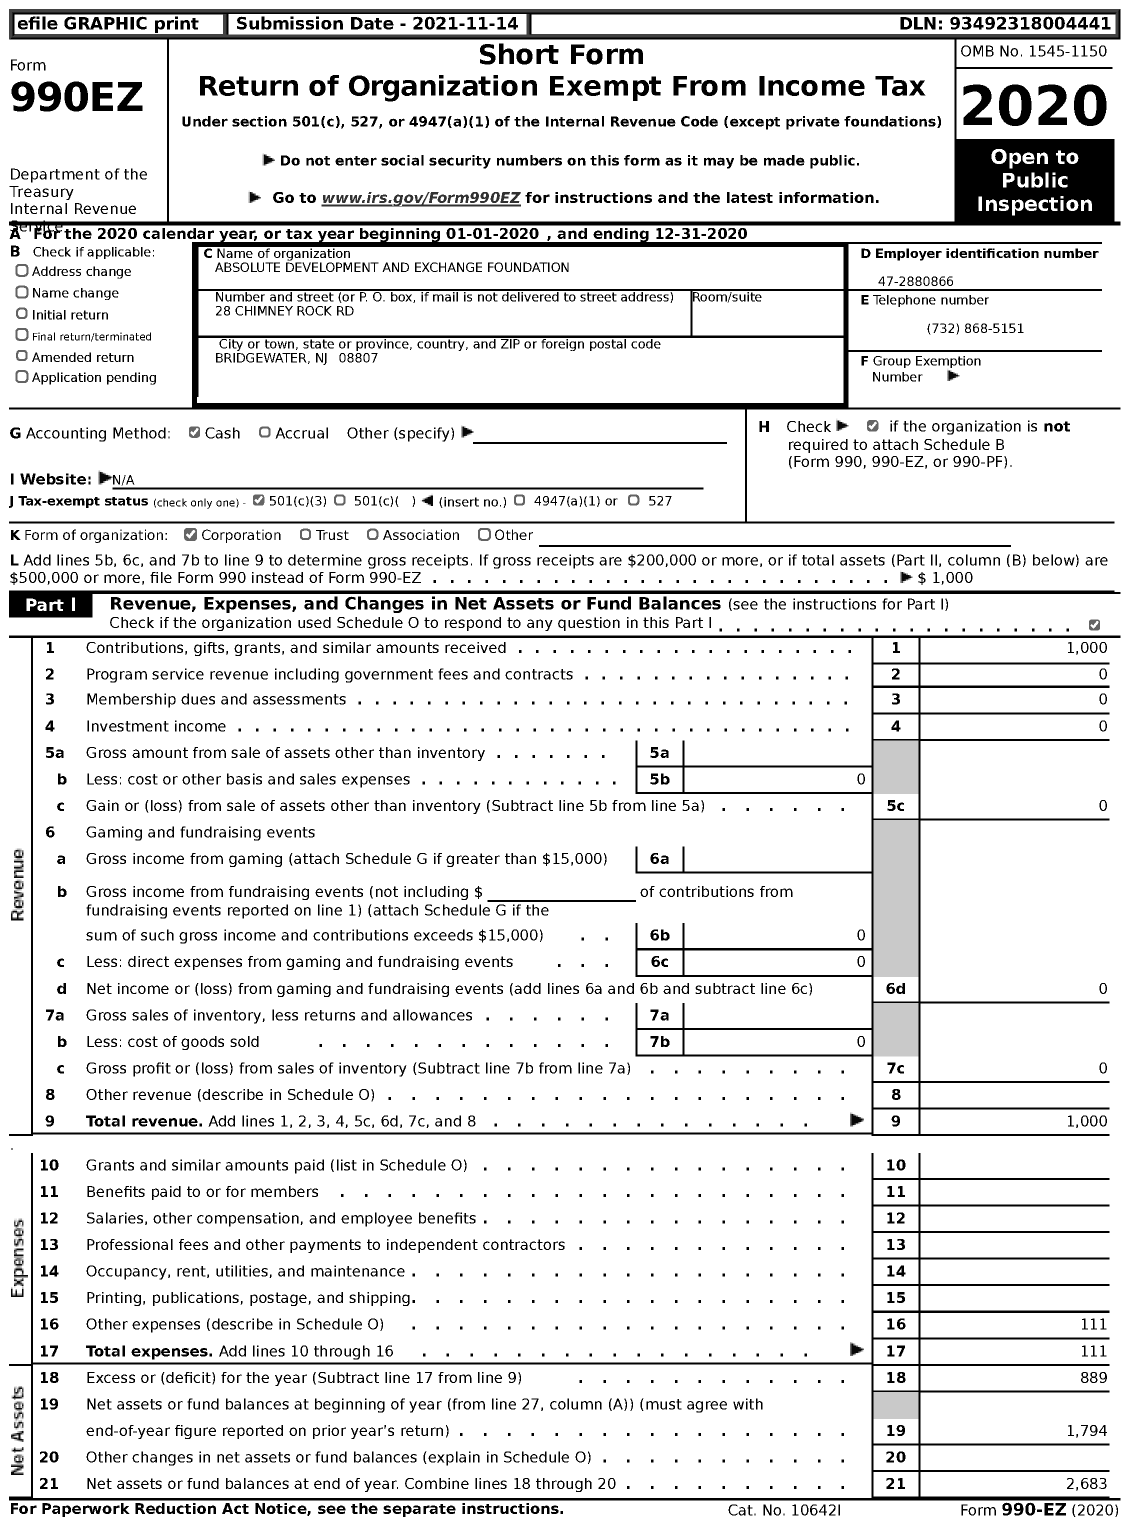 Image of first page of 2020 Form 990EZ for Absolute Development and Exchange Foundation